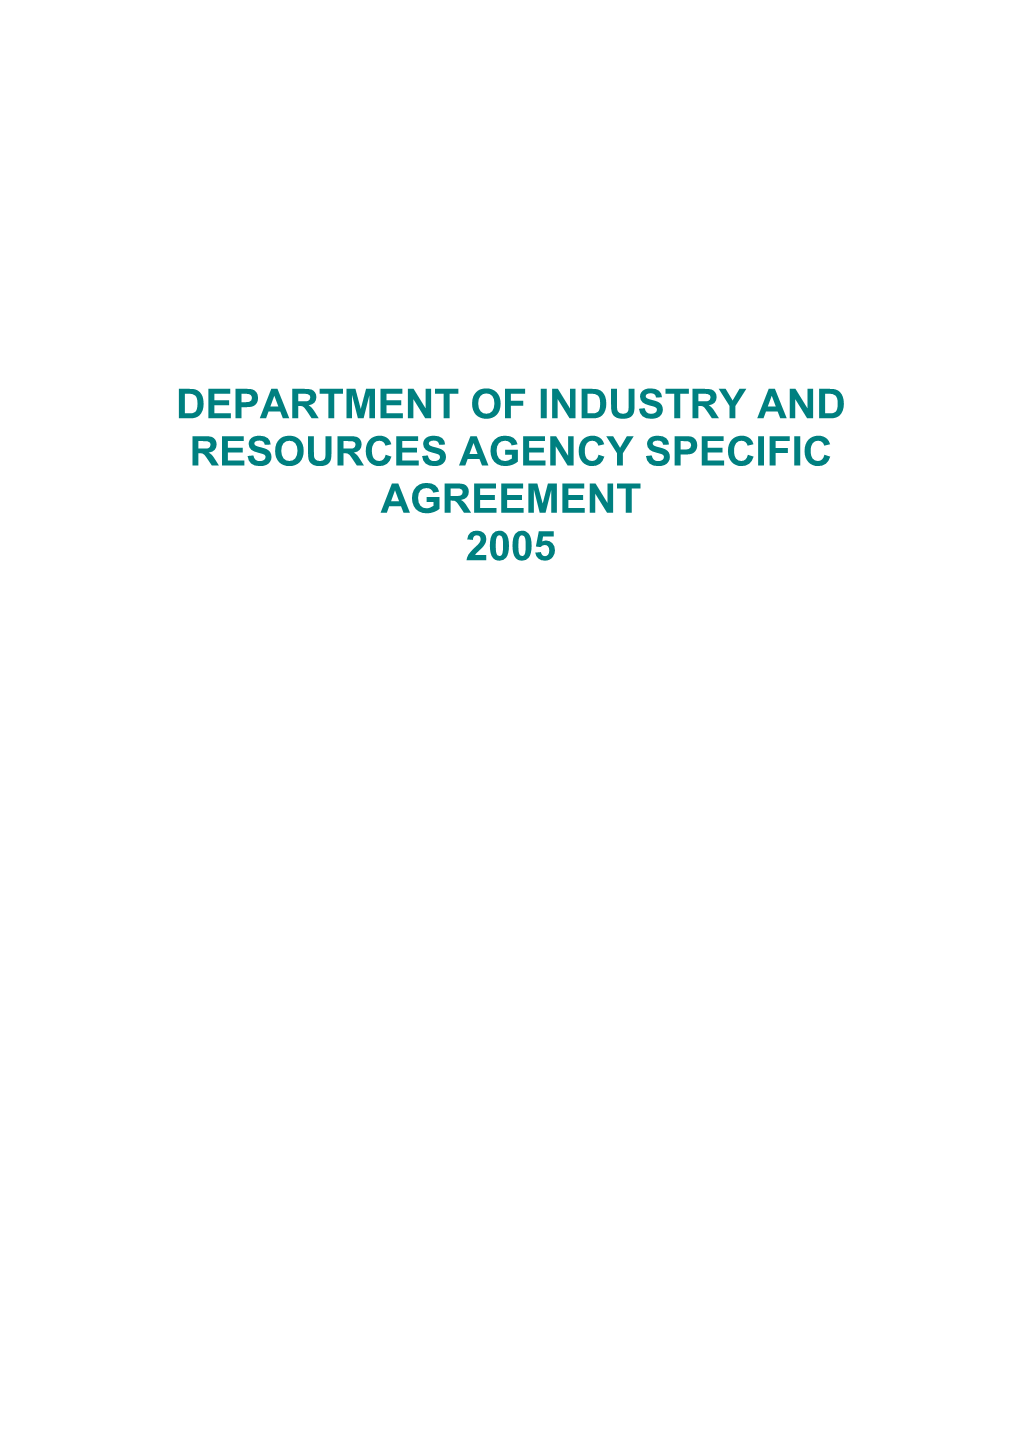 Department of Industry and Resources Agency Specific Agreement 2005